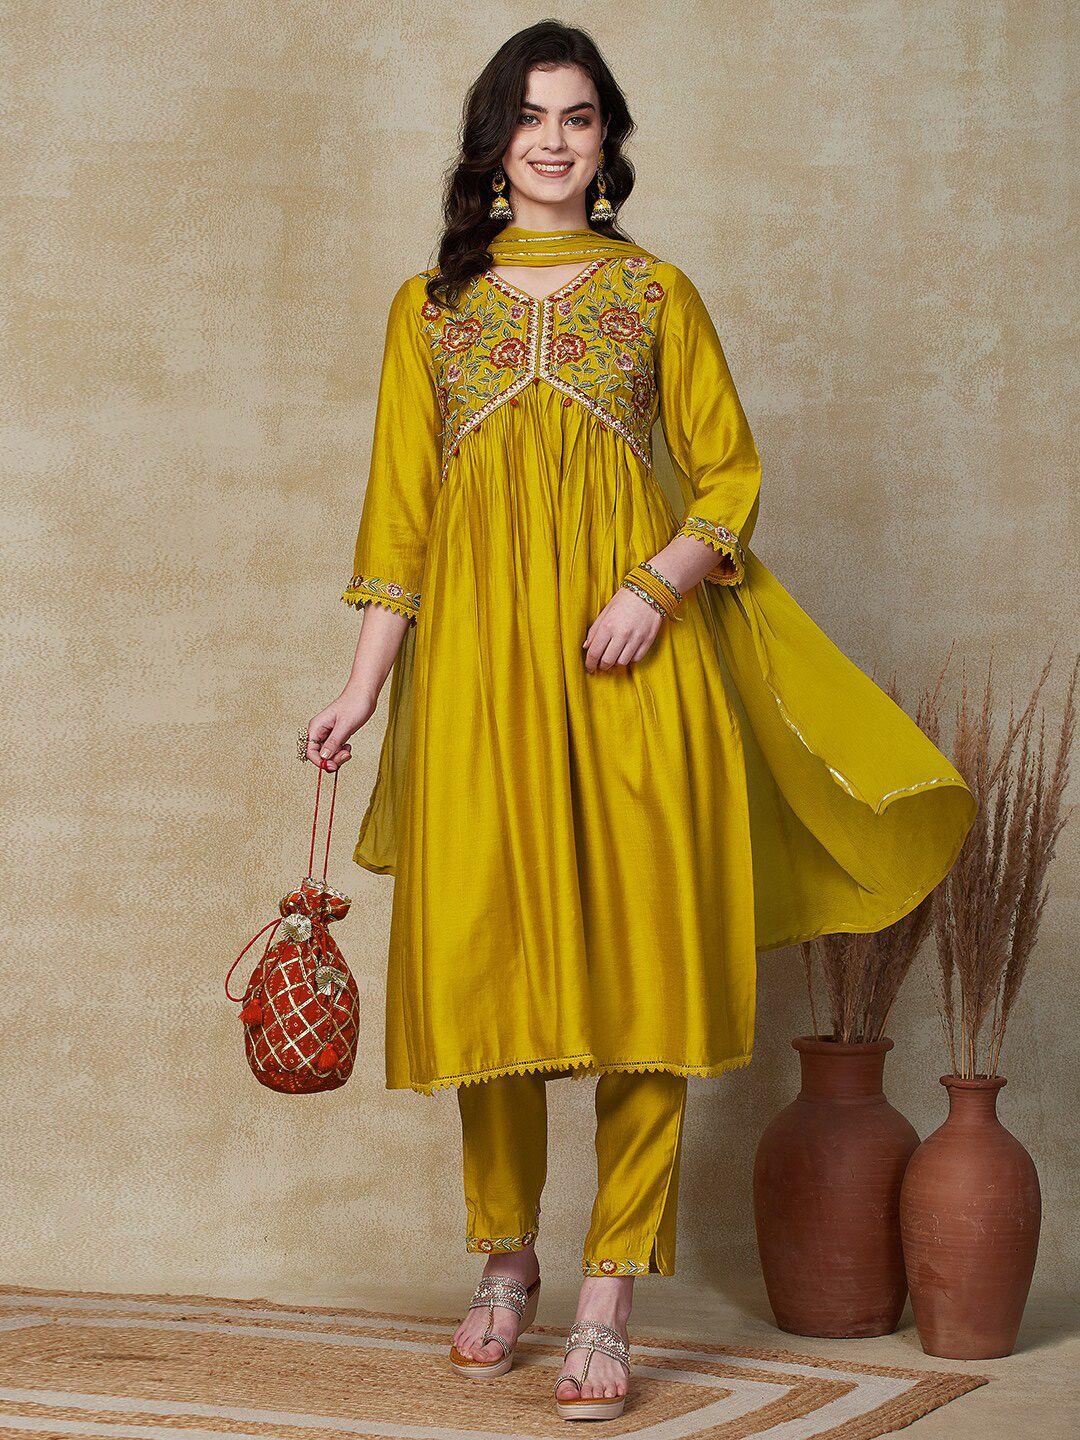 fashor-yellow-floral-embroidered-mirror-work-empire-kurta-with-trousers-dupatta